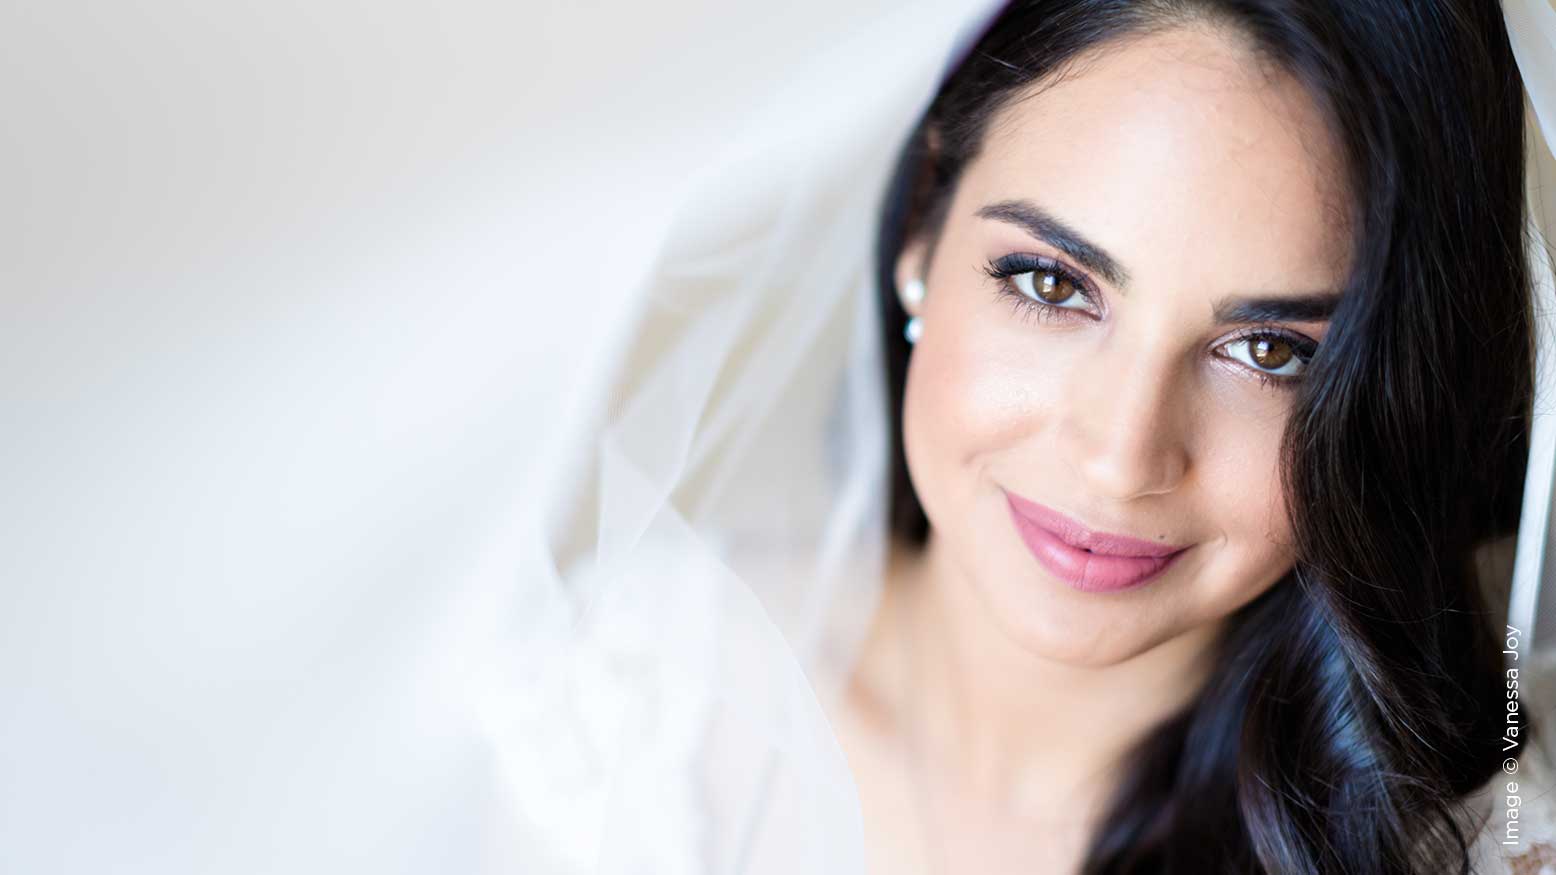 6 Ways to Make Your Bride Look Like a Total Knockout